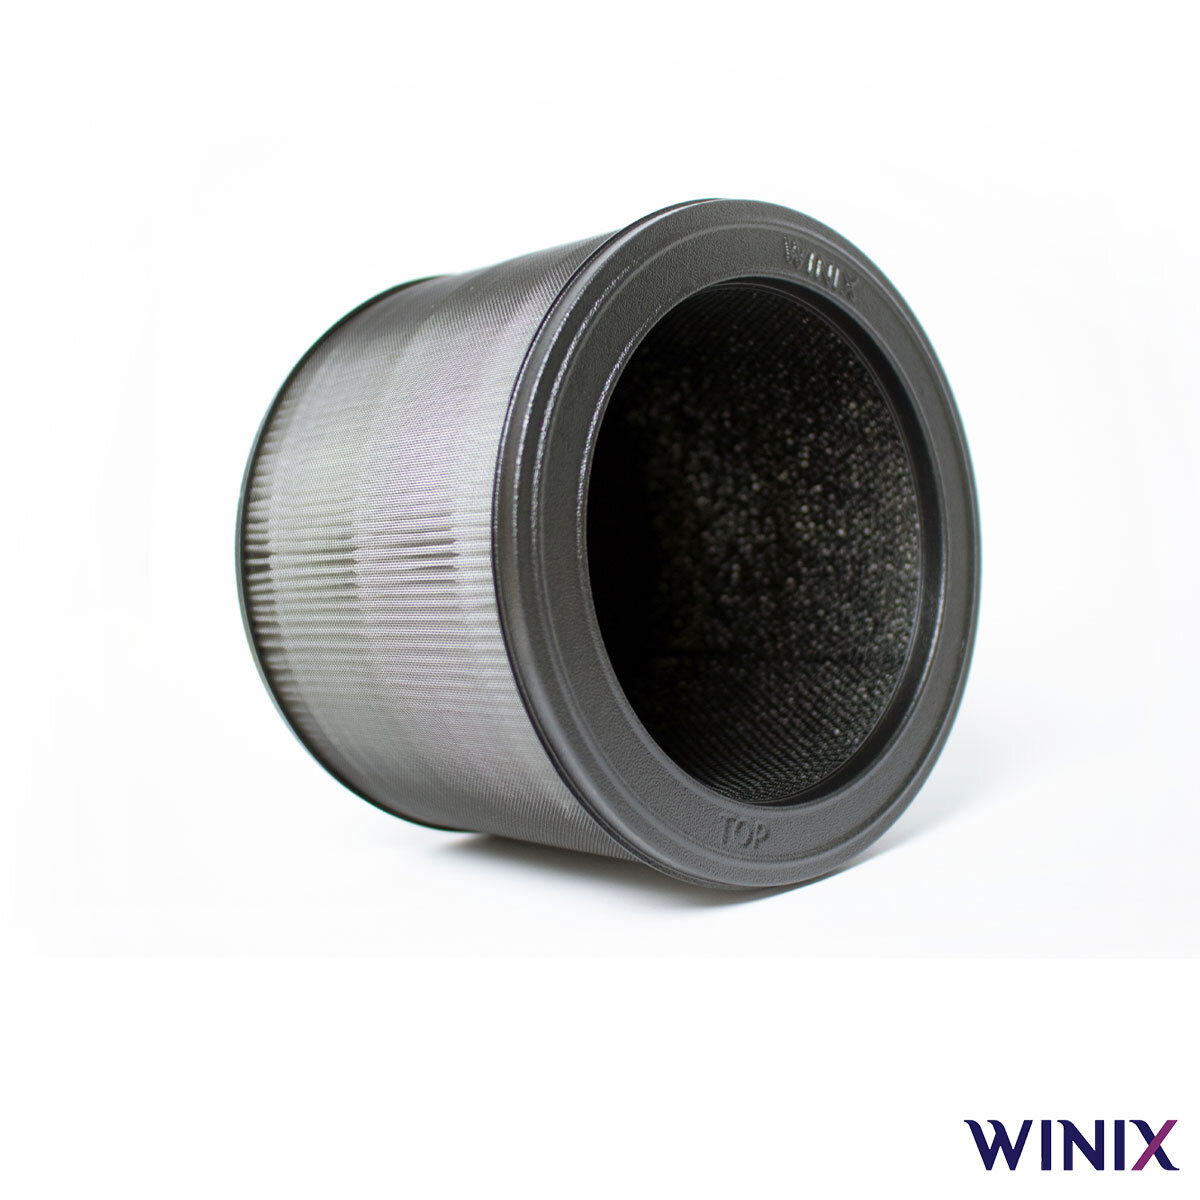 Image of Winix Compact filter on side